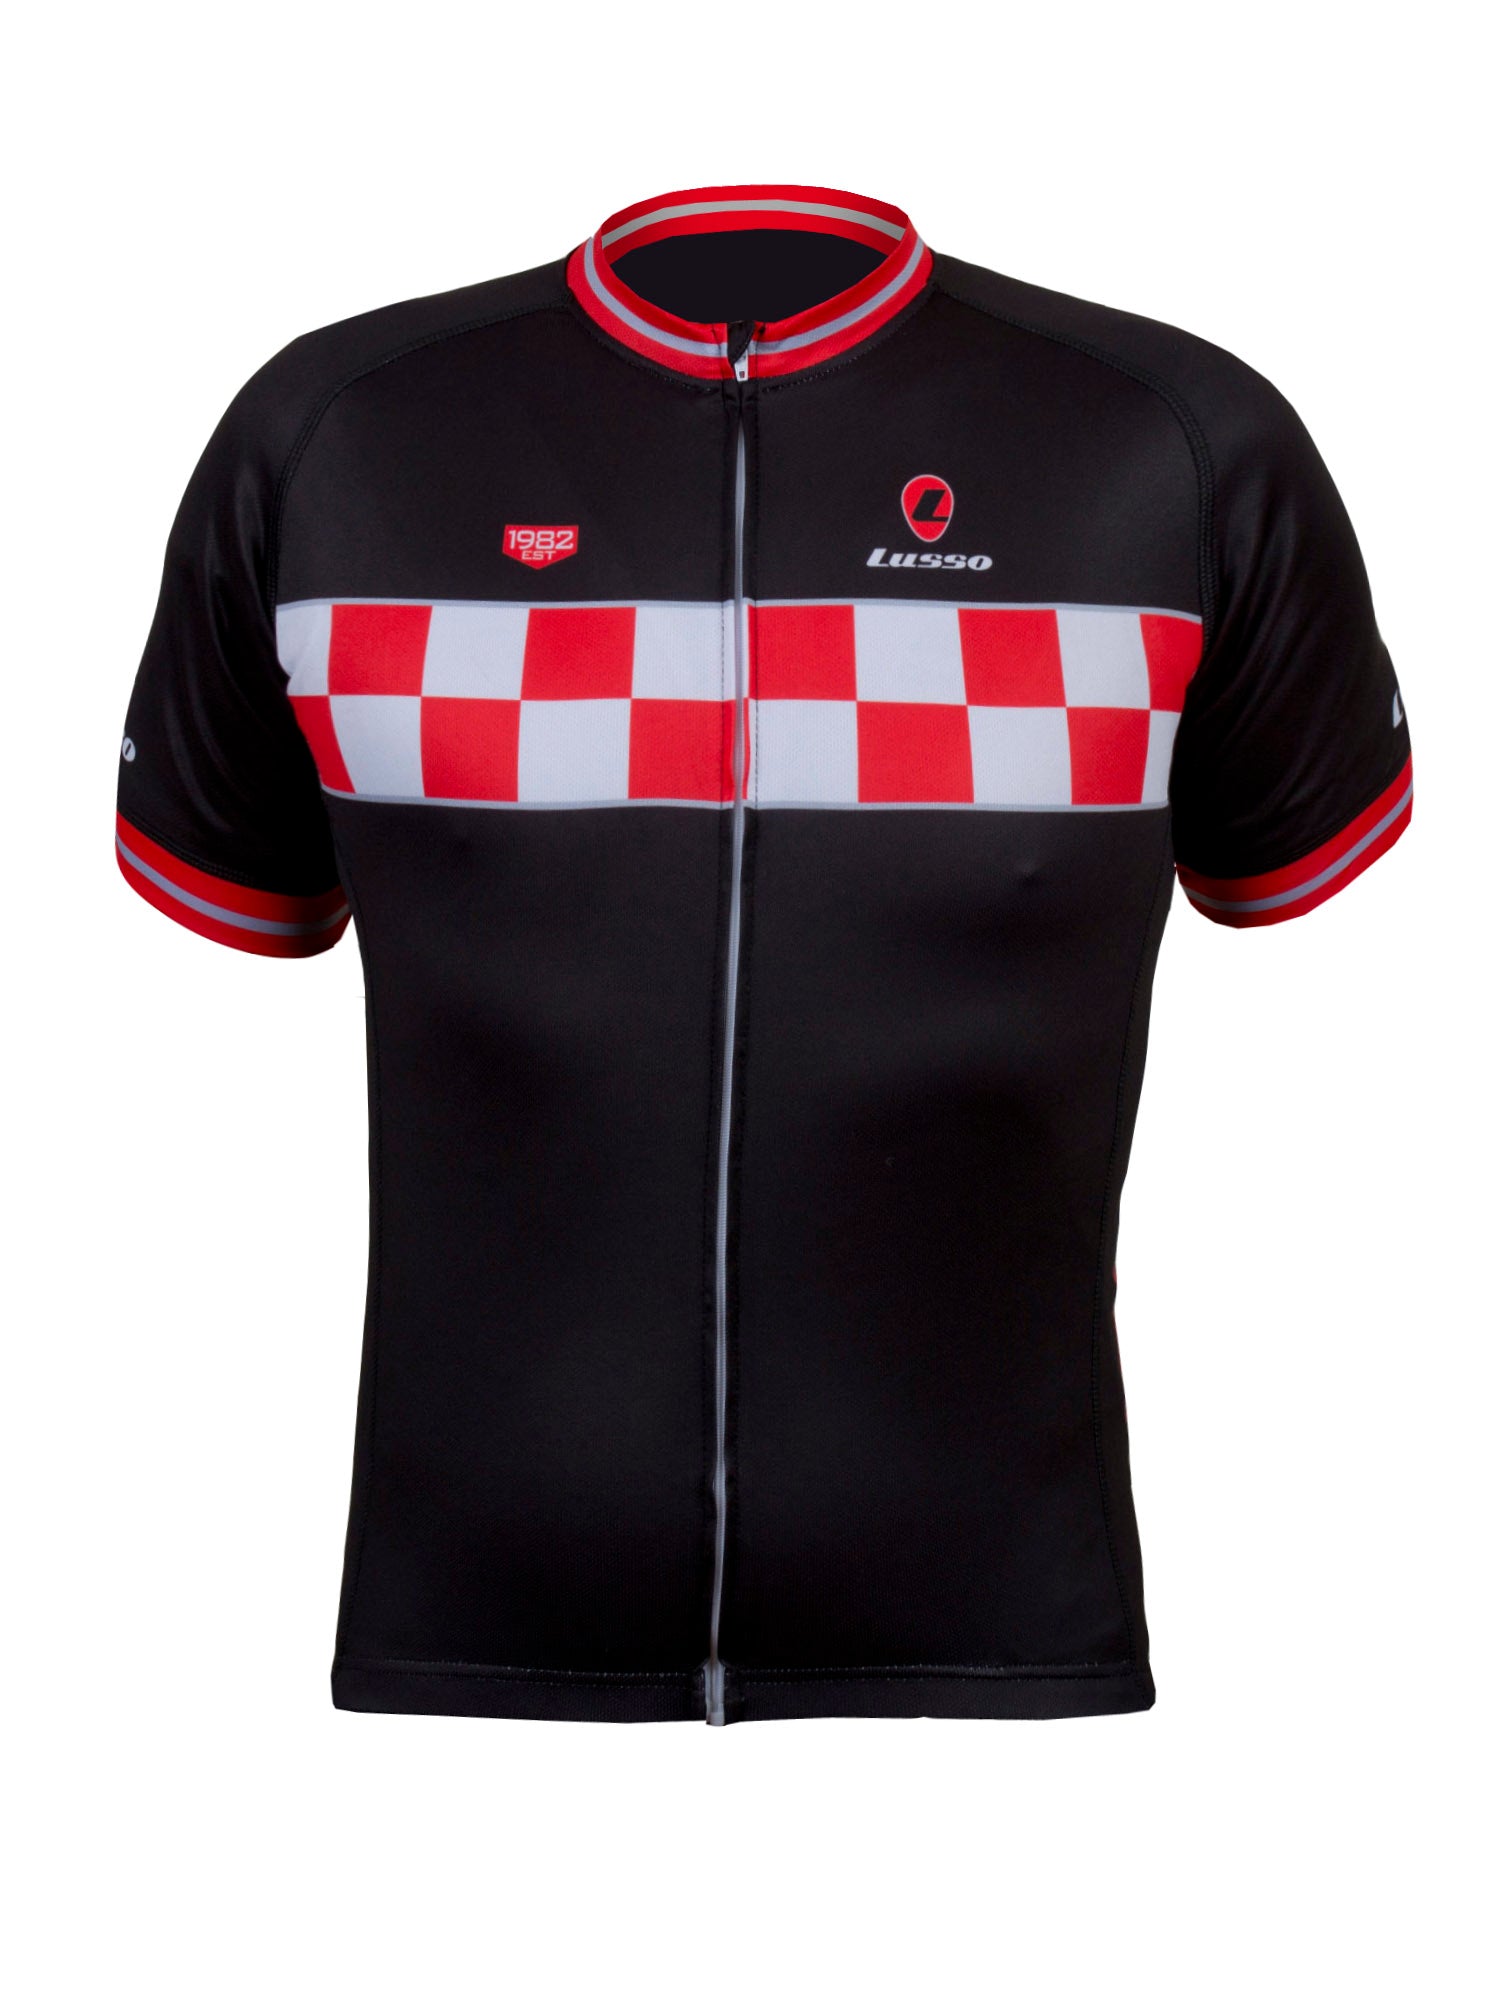 Evolve S/S Jersey Black - Lusso Cycle Wear